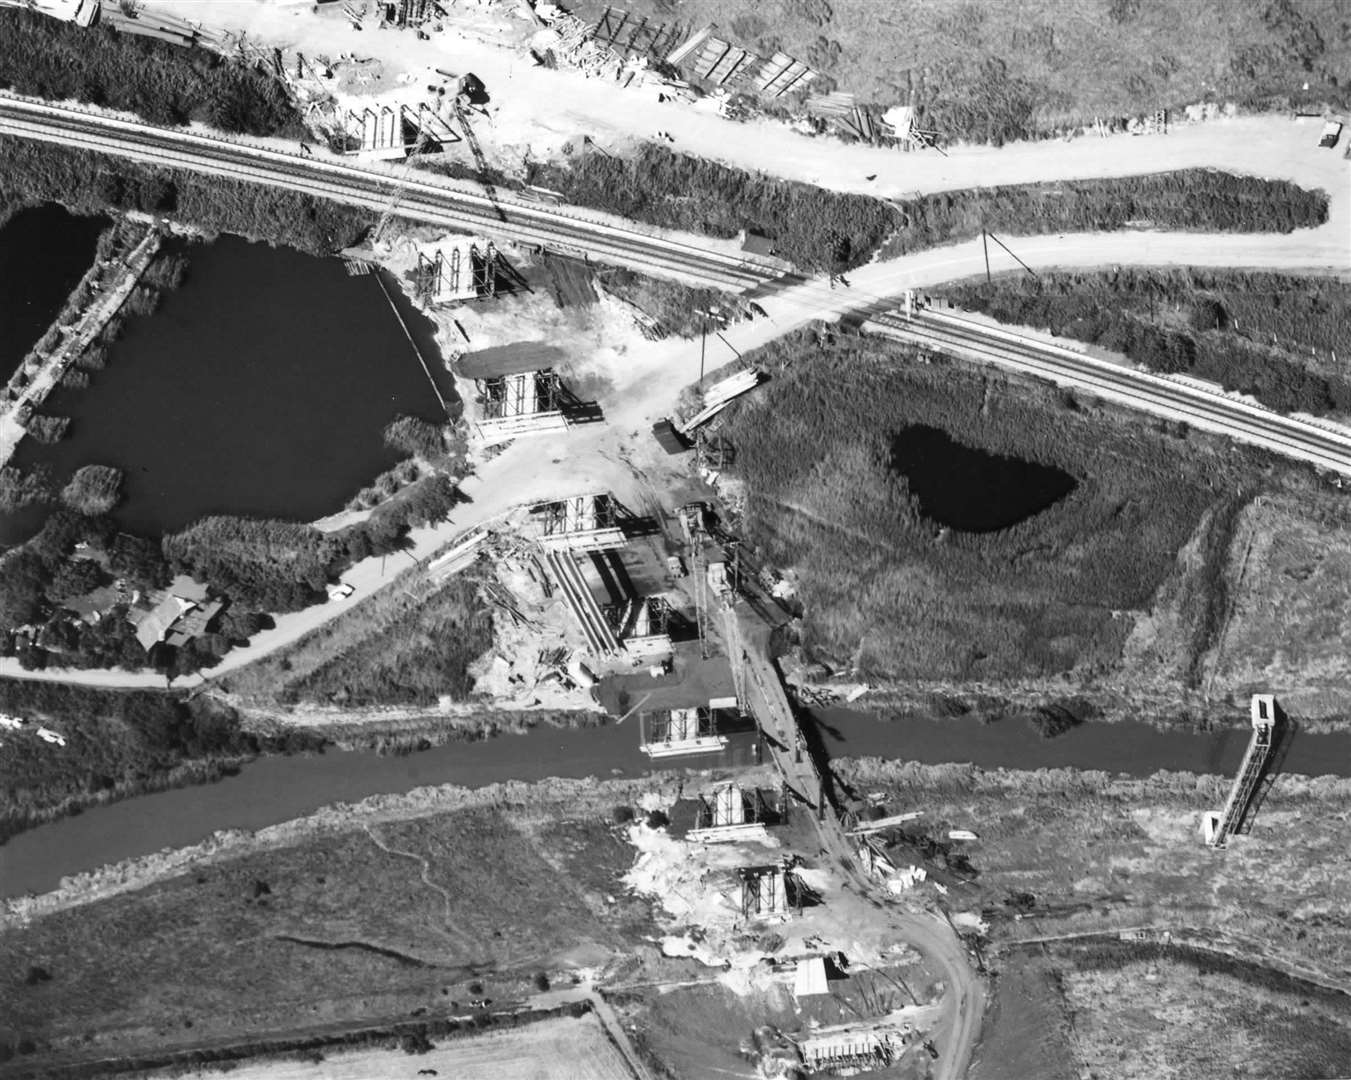 An aerial view looking north of the main viaduct structure on the £3.6 million Sandwich bypass, which is being built here in 1979